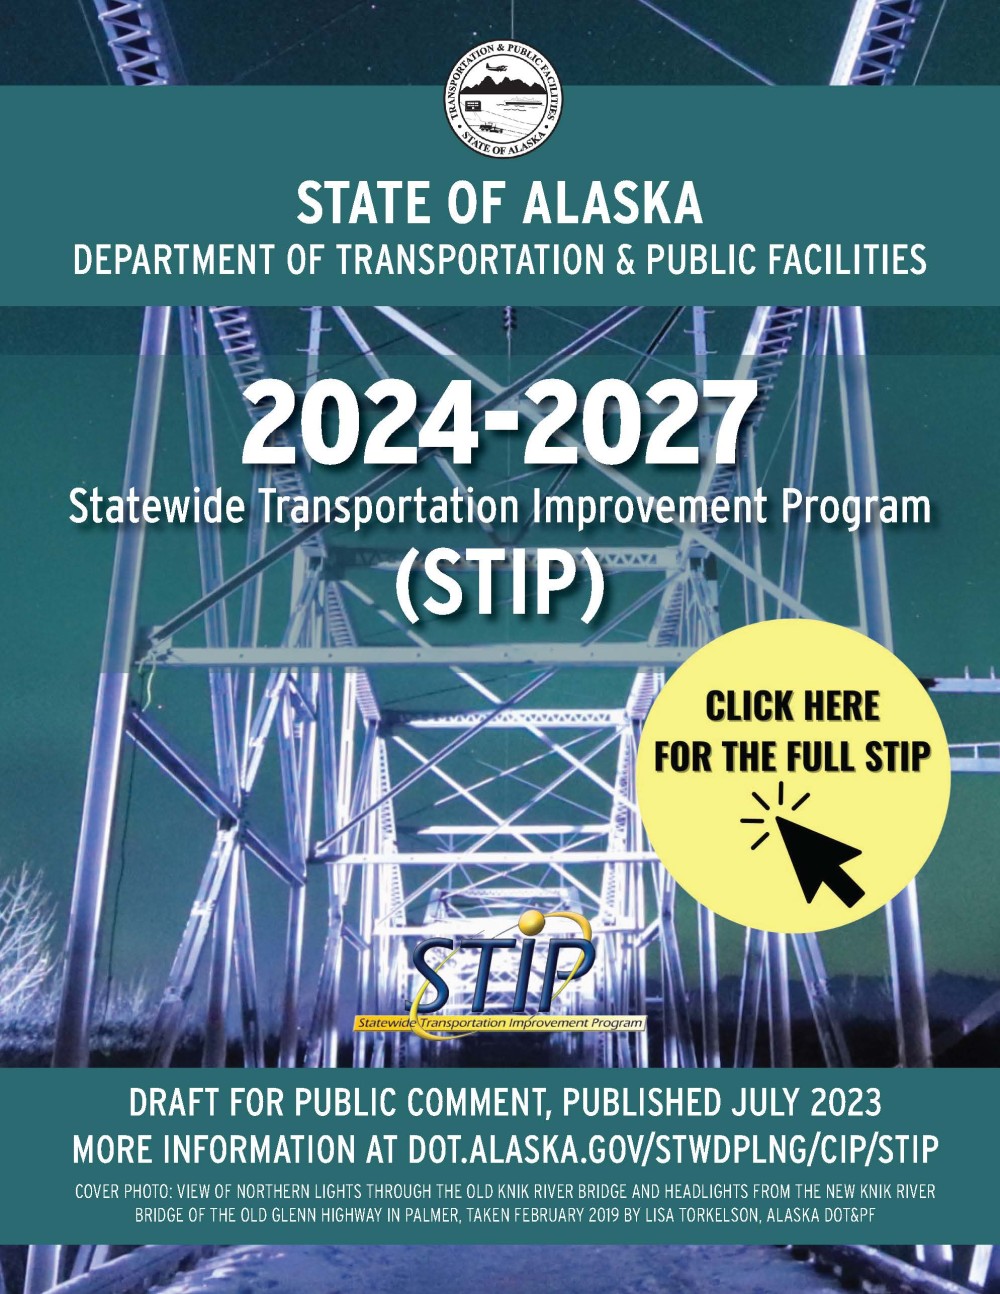 State of Alaska, Department of Transportation and Public Facilities, 2024 through 2027 Statewide Transportation Improvement Program or STIP. This is the draft for public comment, published July 2023. More information is at dot.alaska.gov/stwdlng/cip/stip. Cover photo: View of Northern Lights through the old Knik River Bridge and headlights from the new Knik River Bridge on the Old Glenn Highway in Palmer, taken February 2019 by Lisa Torkelson, Alaska DOT&PF